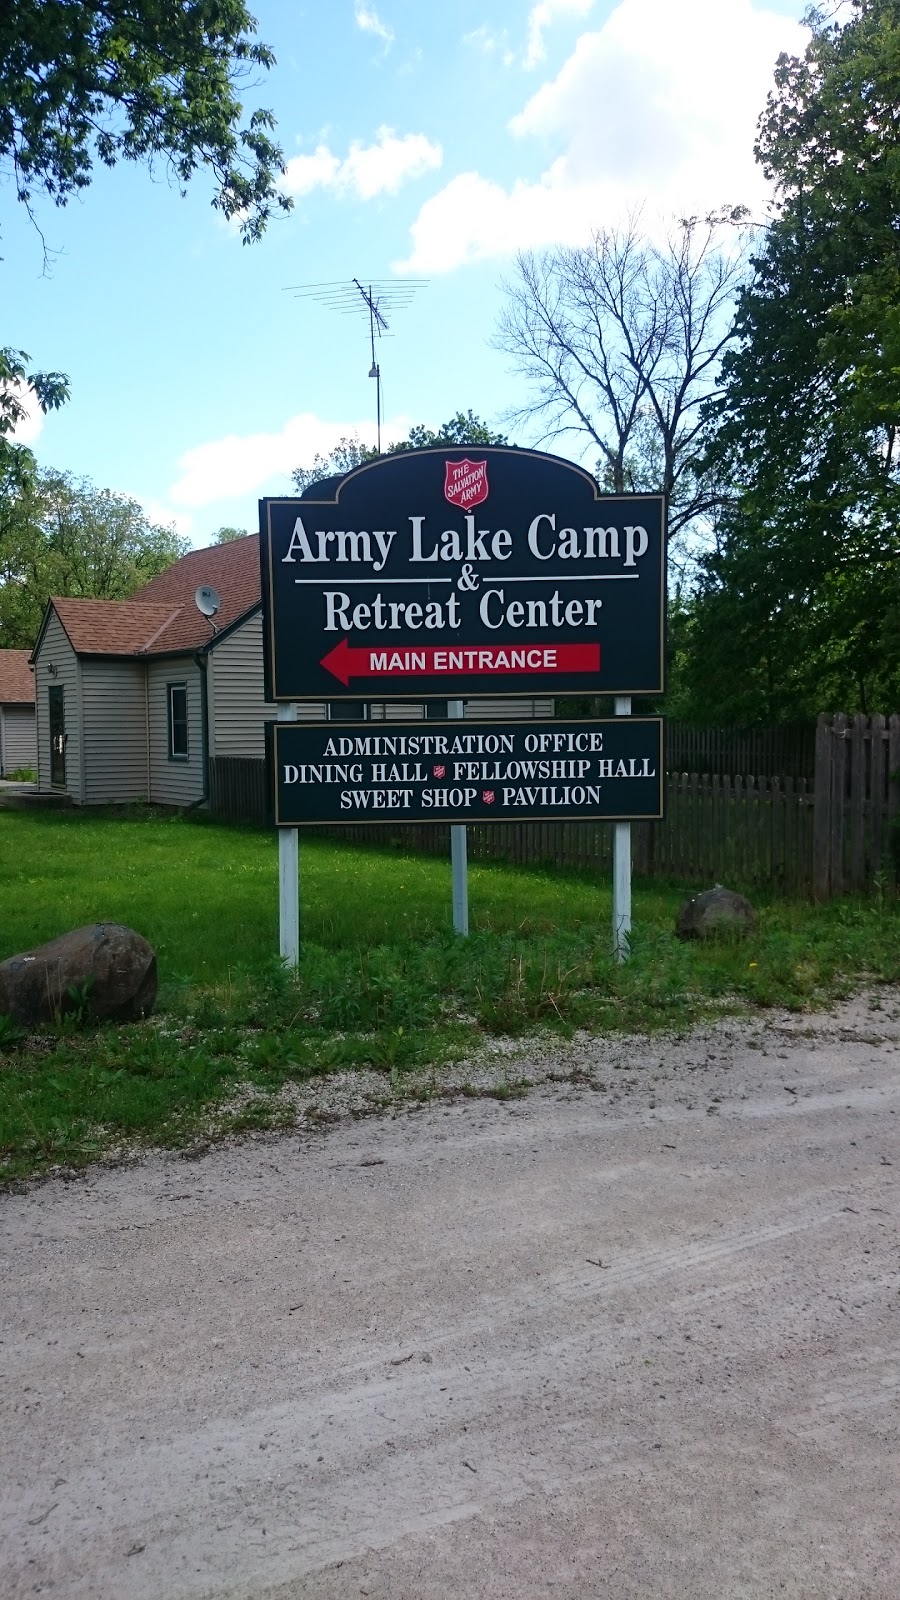 The Salvation Army - Army Lake Camp | N8725 Army Lake Rd, East Troy, WI 53120 | Phone: (262) 642-6400